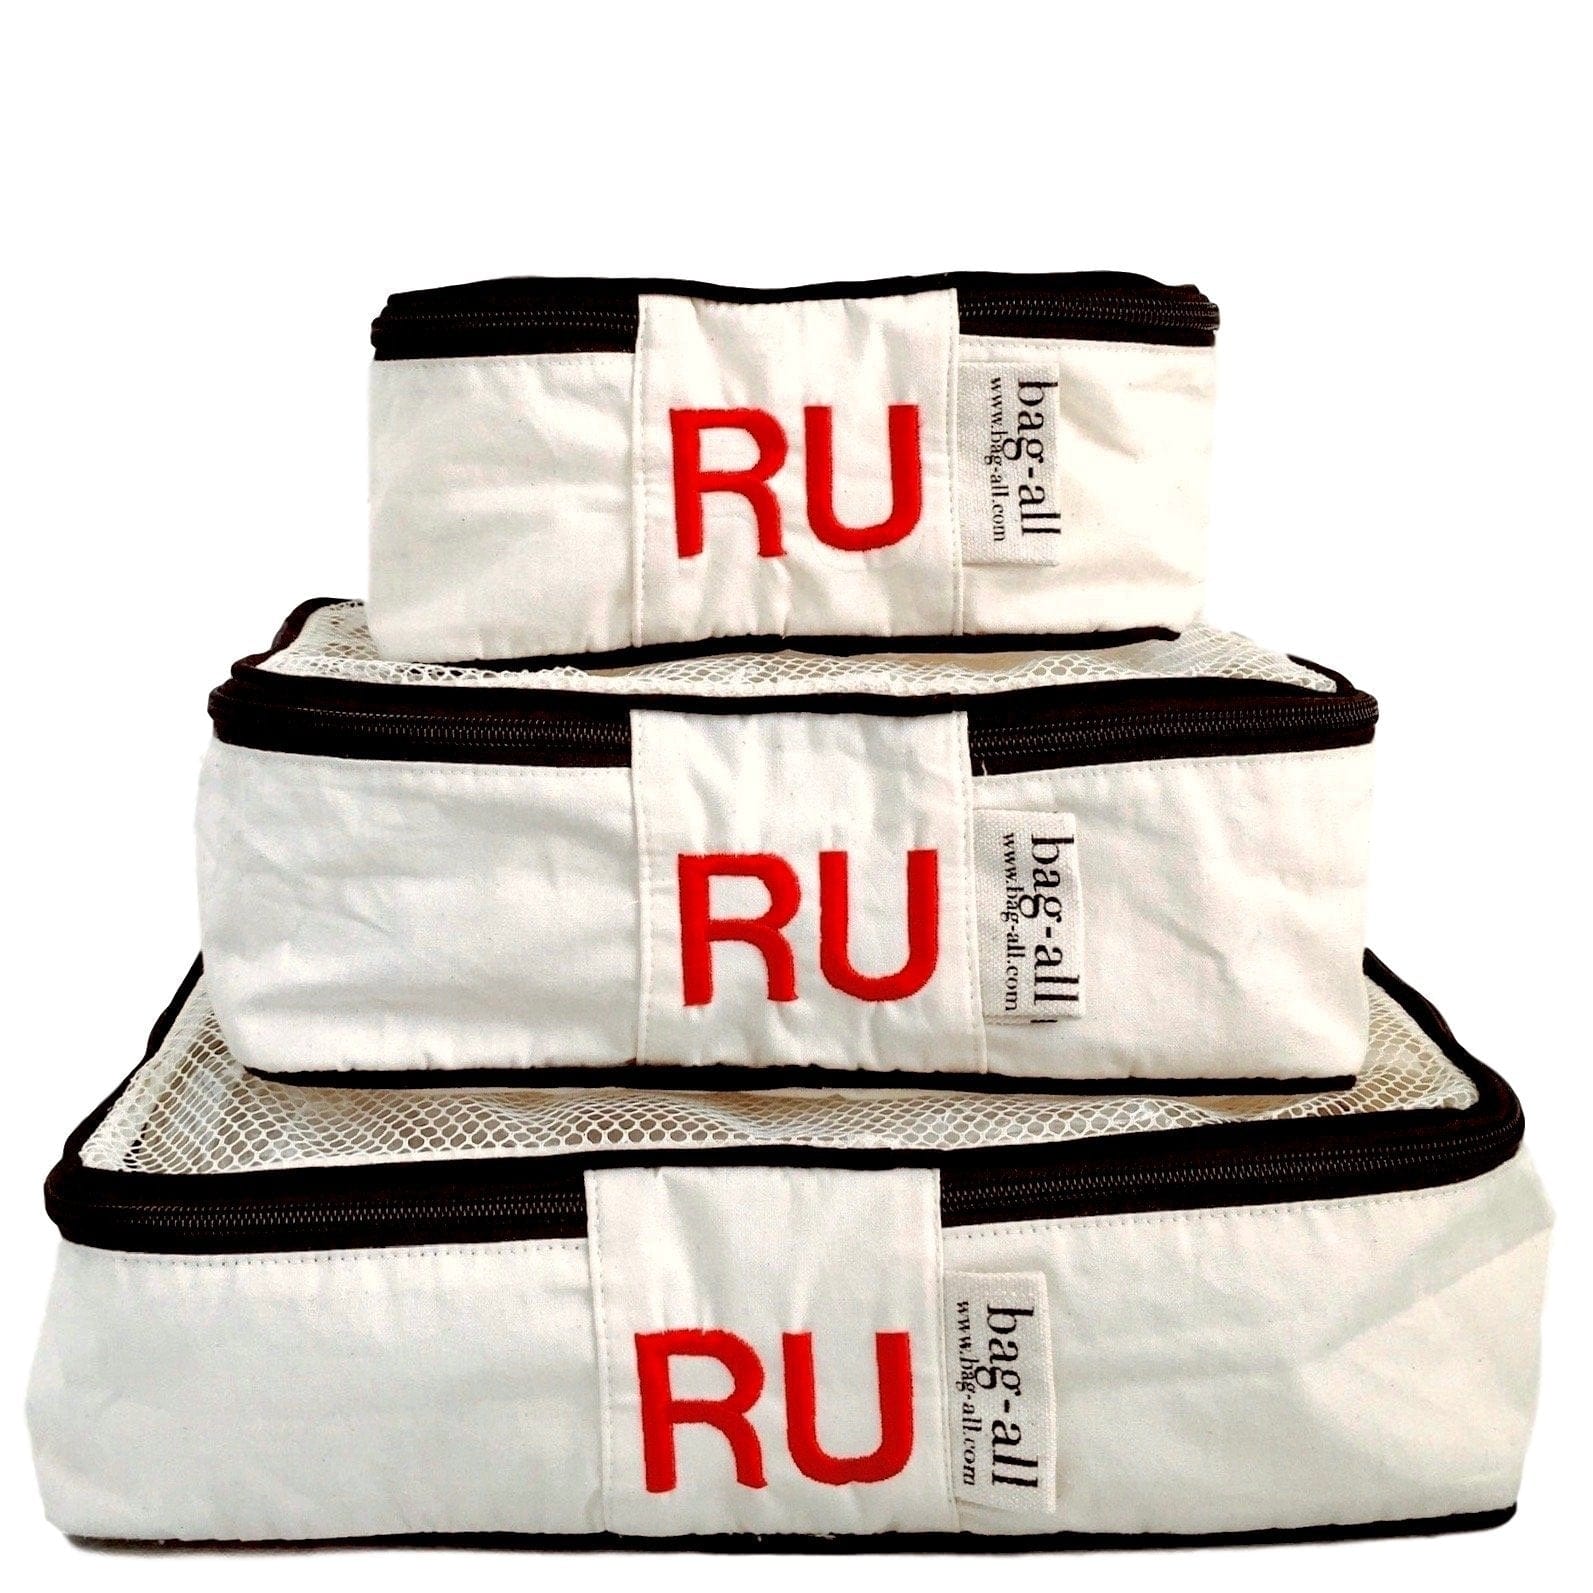 White packing cubes with "RU" monogrammed on the back. 